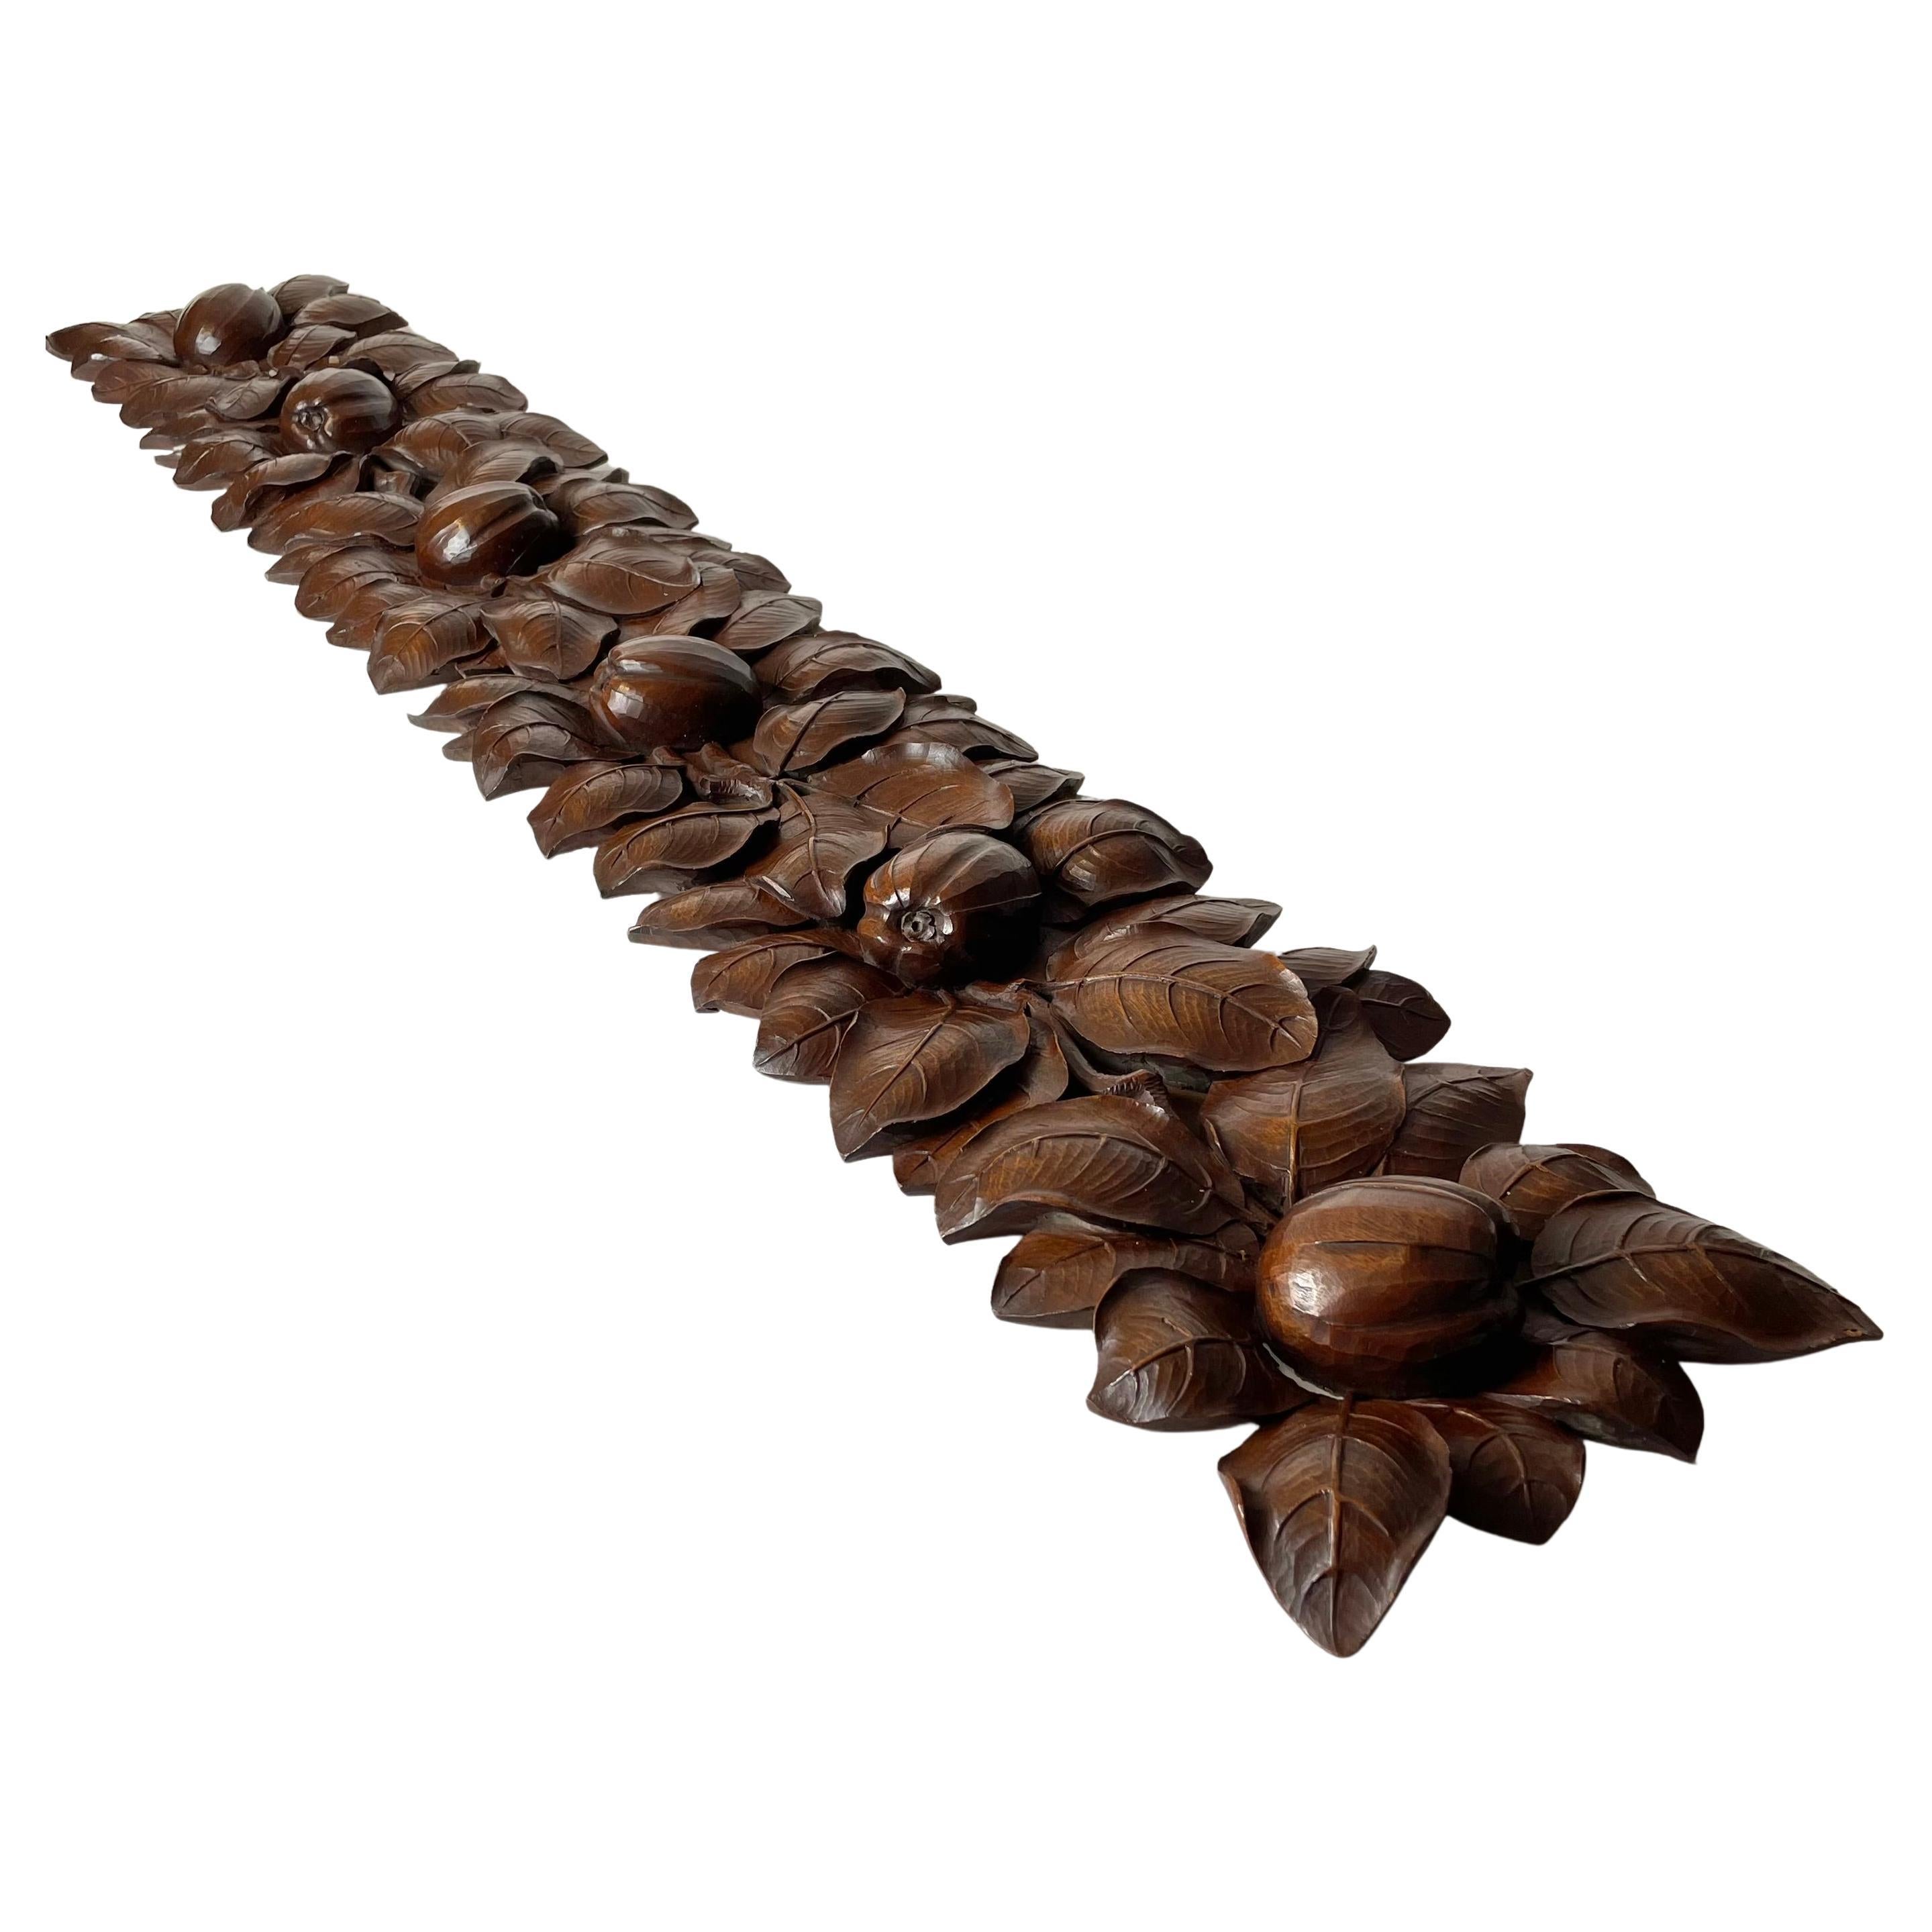 Walnut Woodcarved Decorative Element Depicting Apples Foliage Early 20th Century For Sale